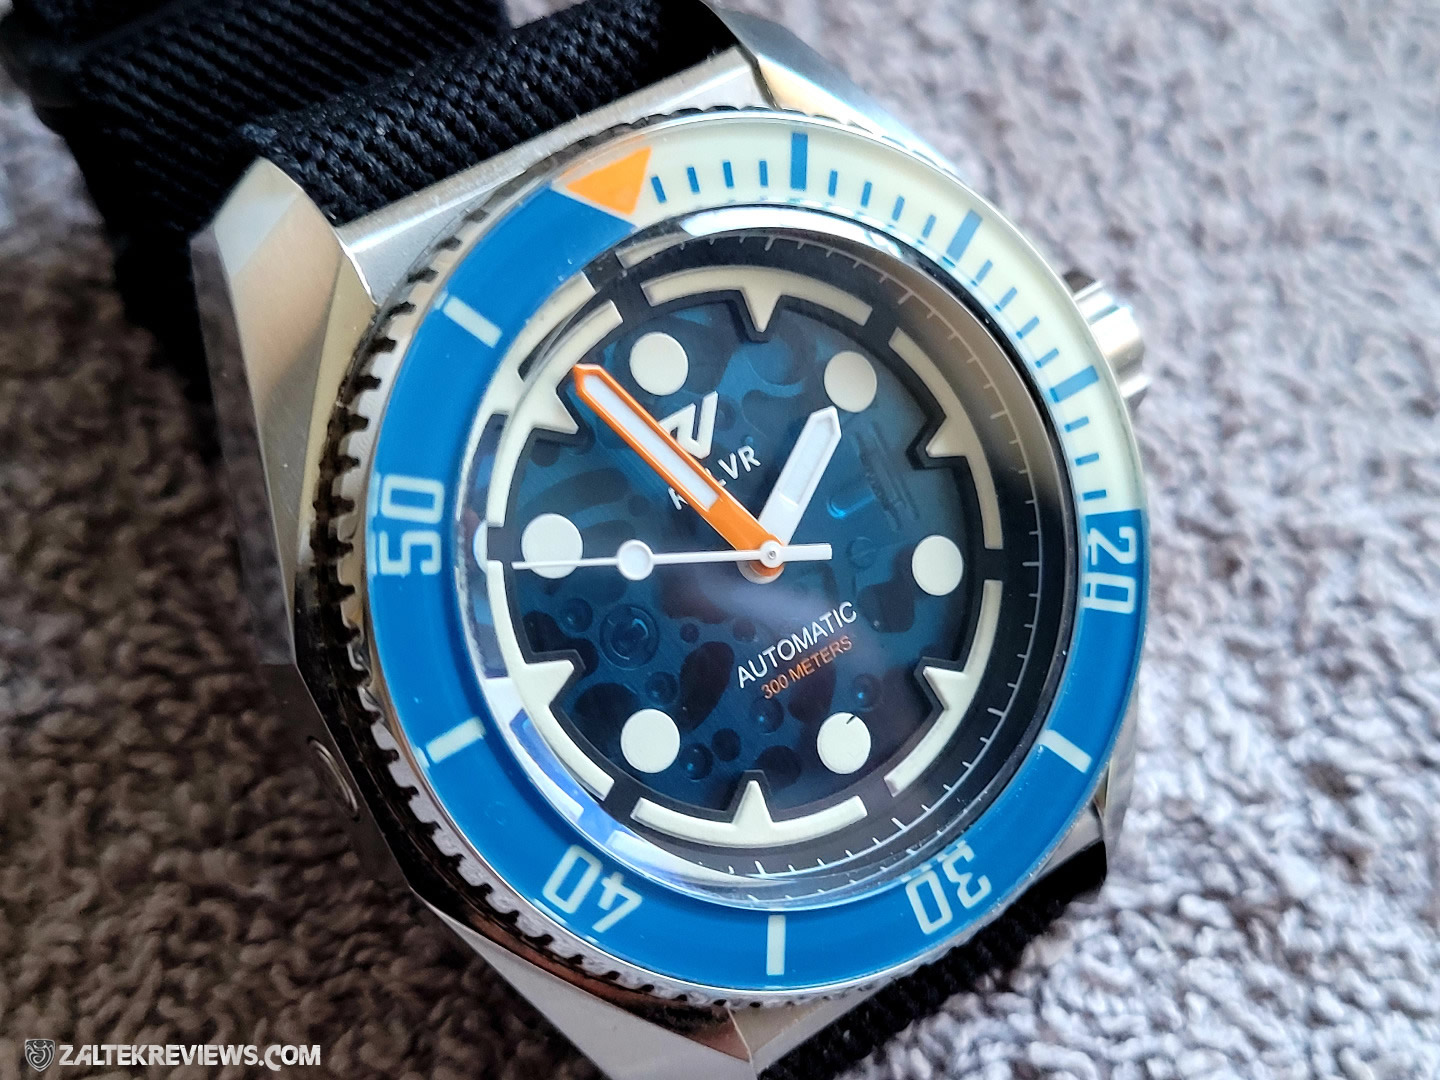 RVLVR SD-1 Dive Watch Review